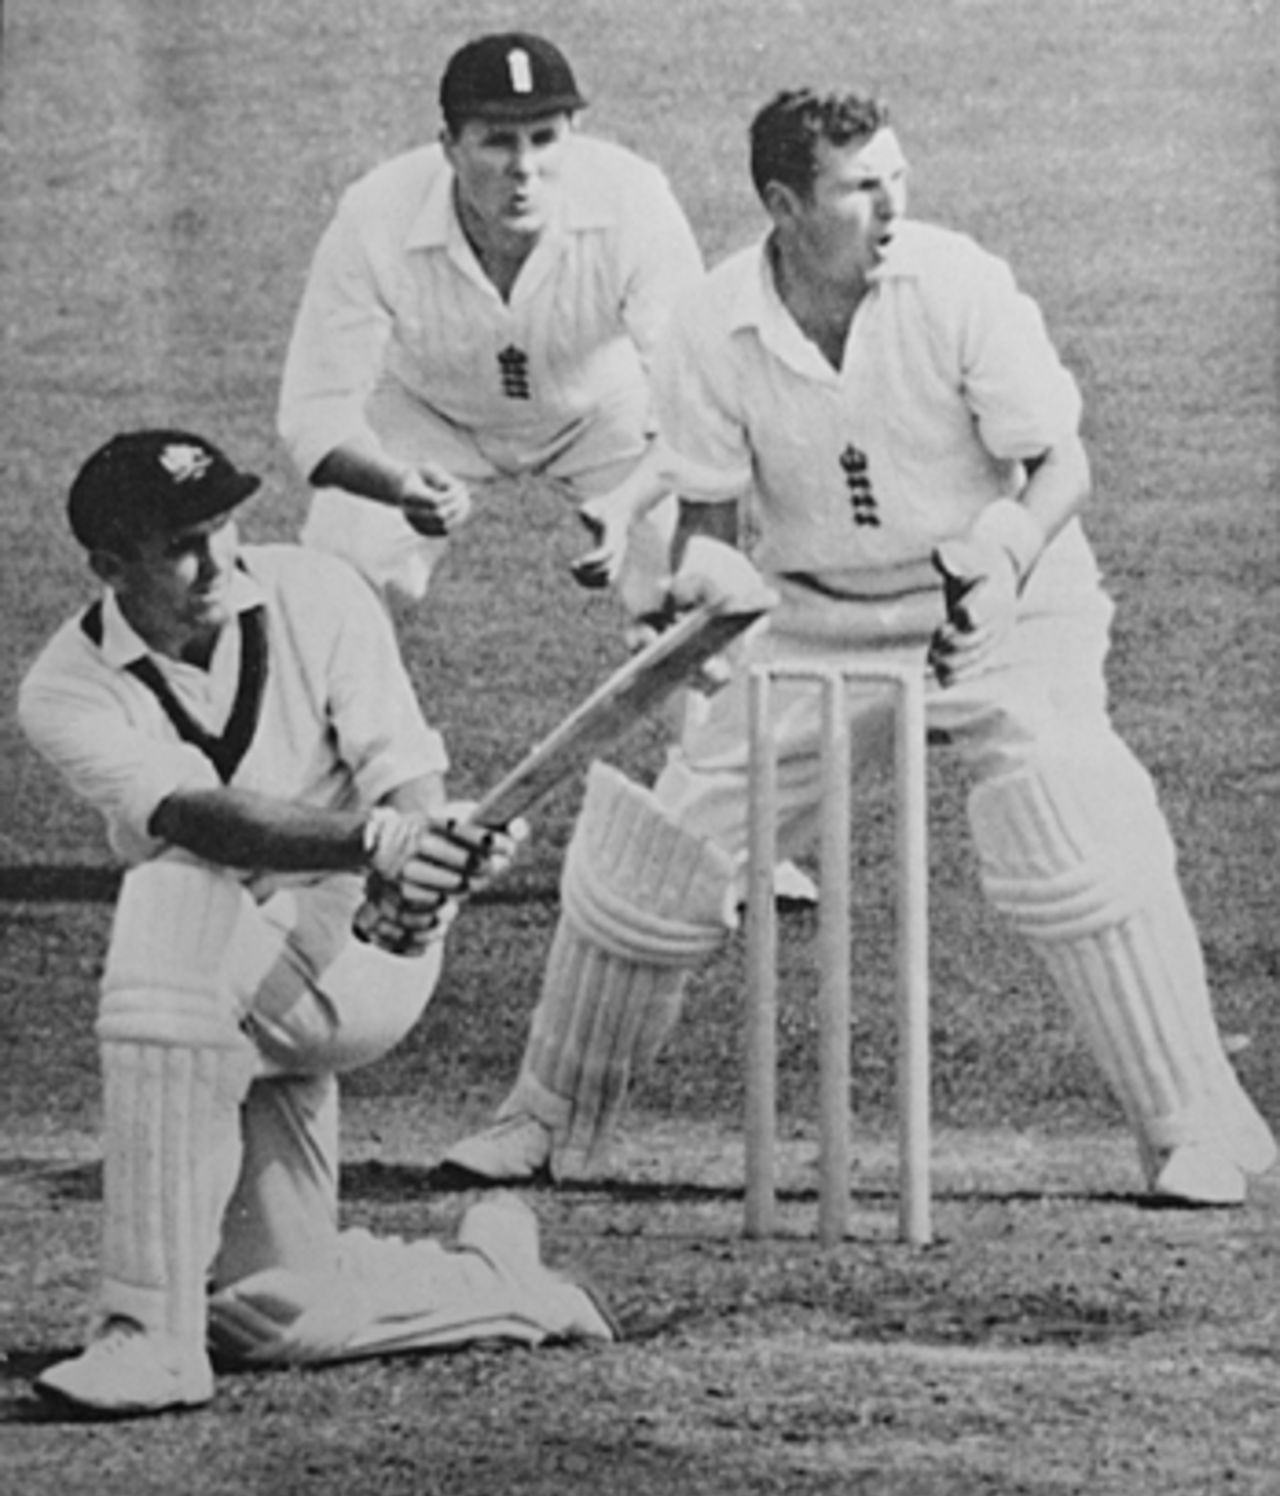 Bobby Simpson sweeps on his way to 311, England v Australia, Old Trafford, 4th Test, 1964